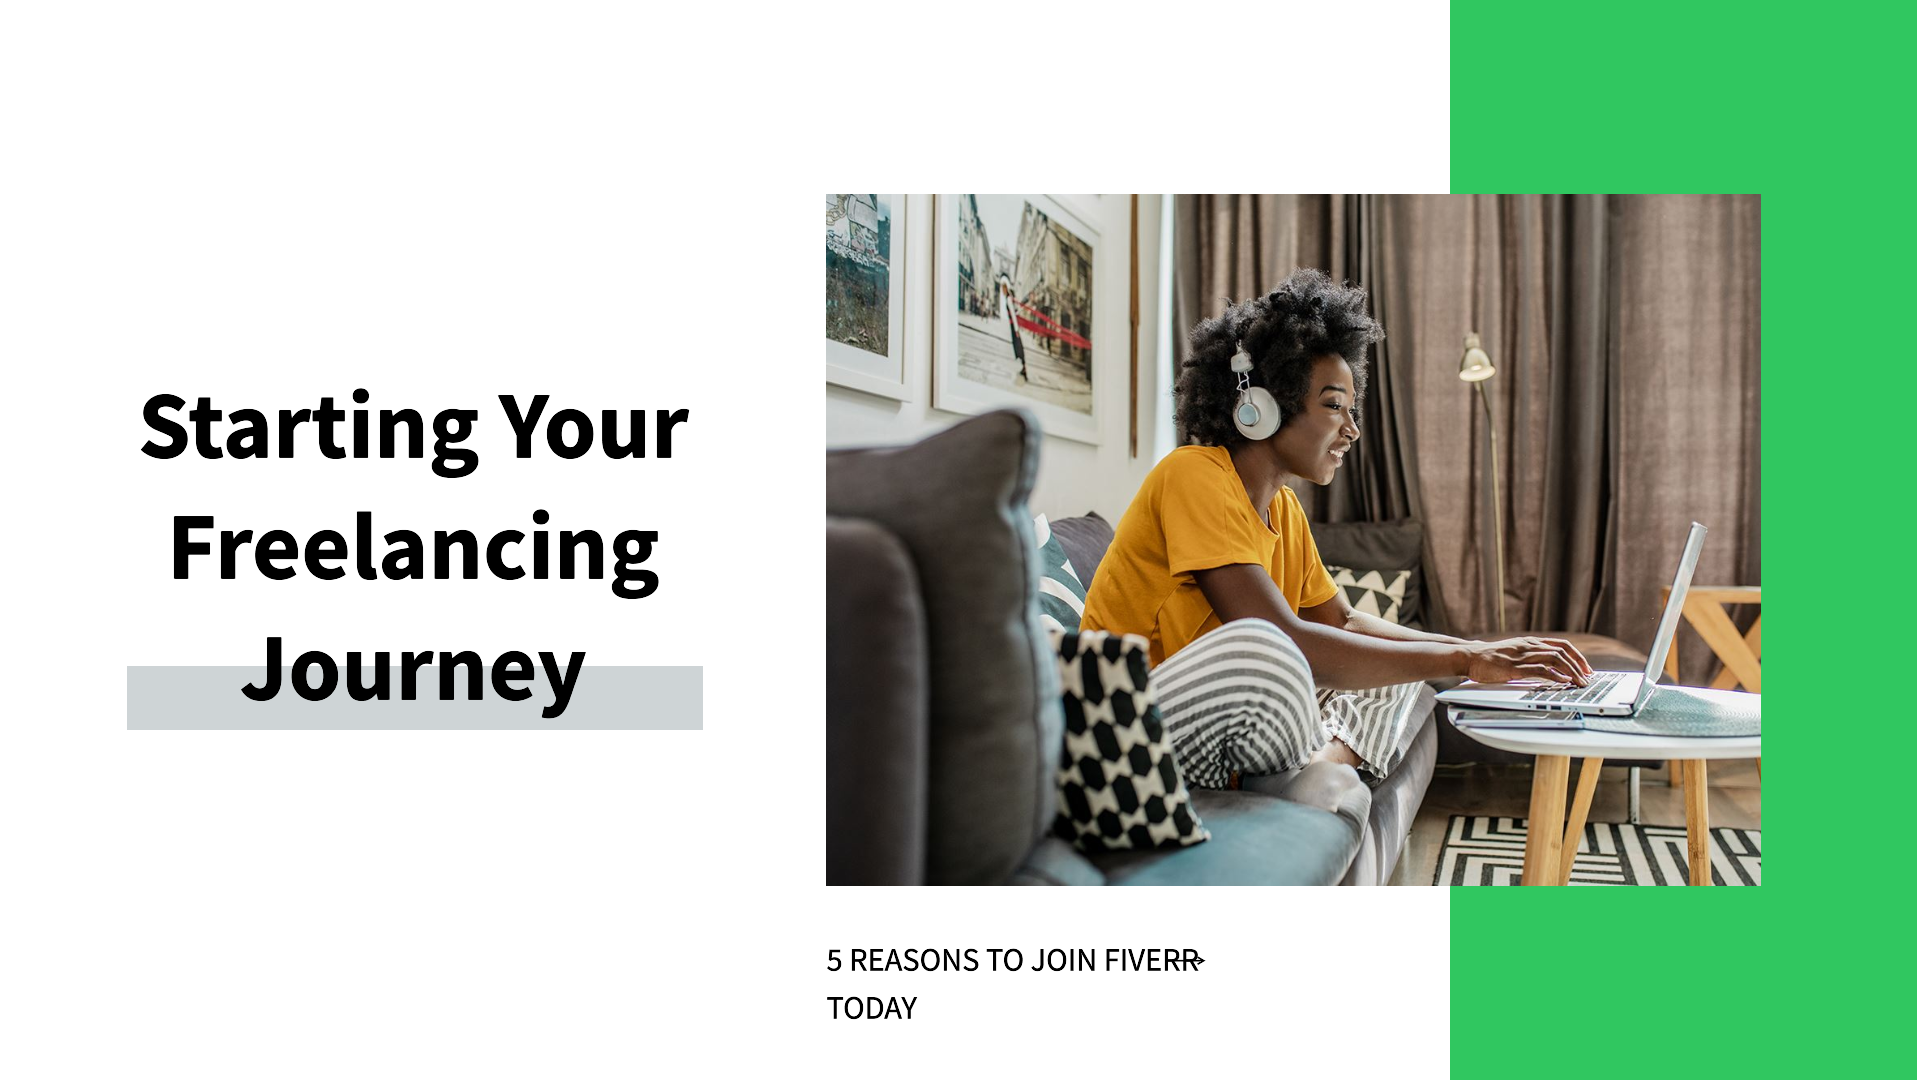 Freelancing Freedom: 5 Reasons Why You Need a Fiverr Account (Right Now!)